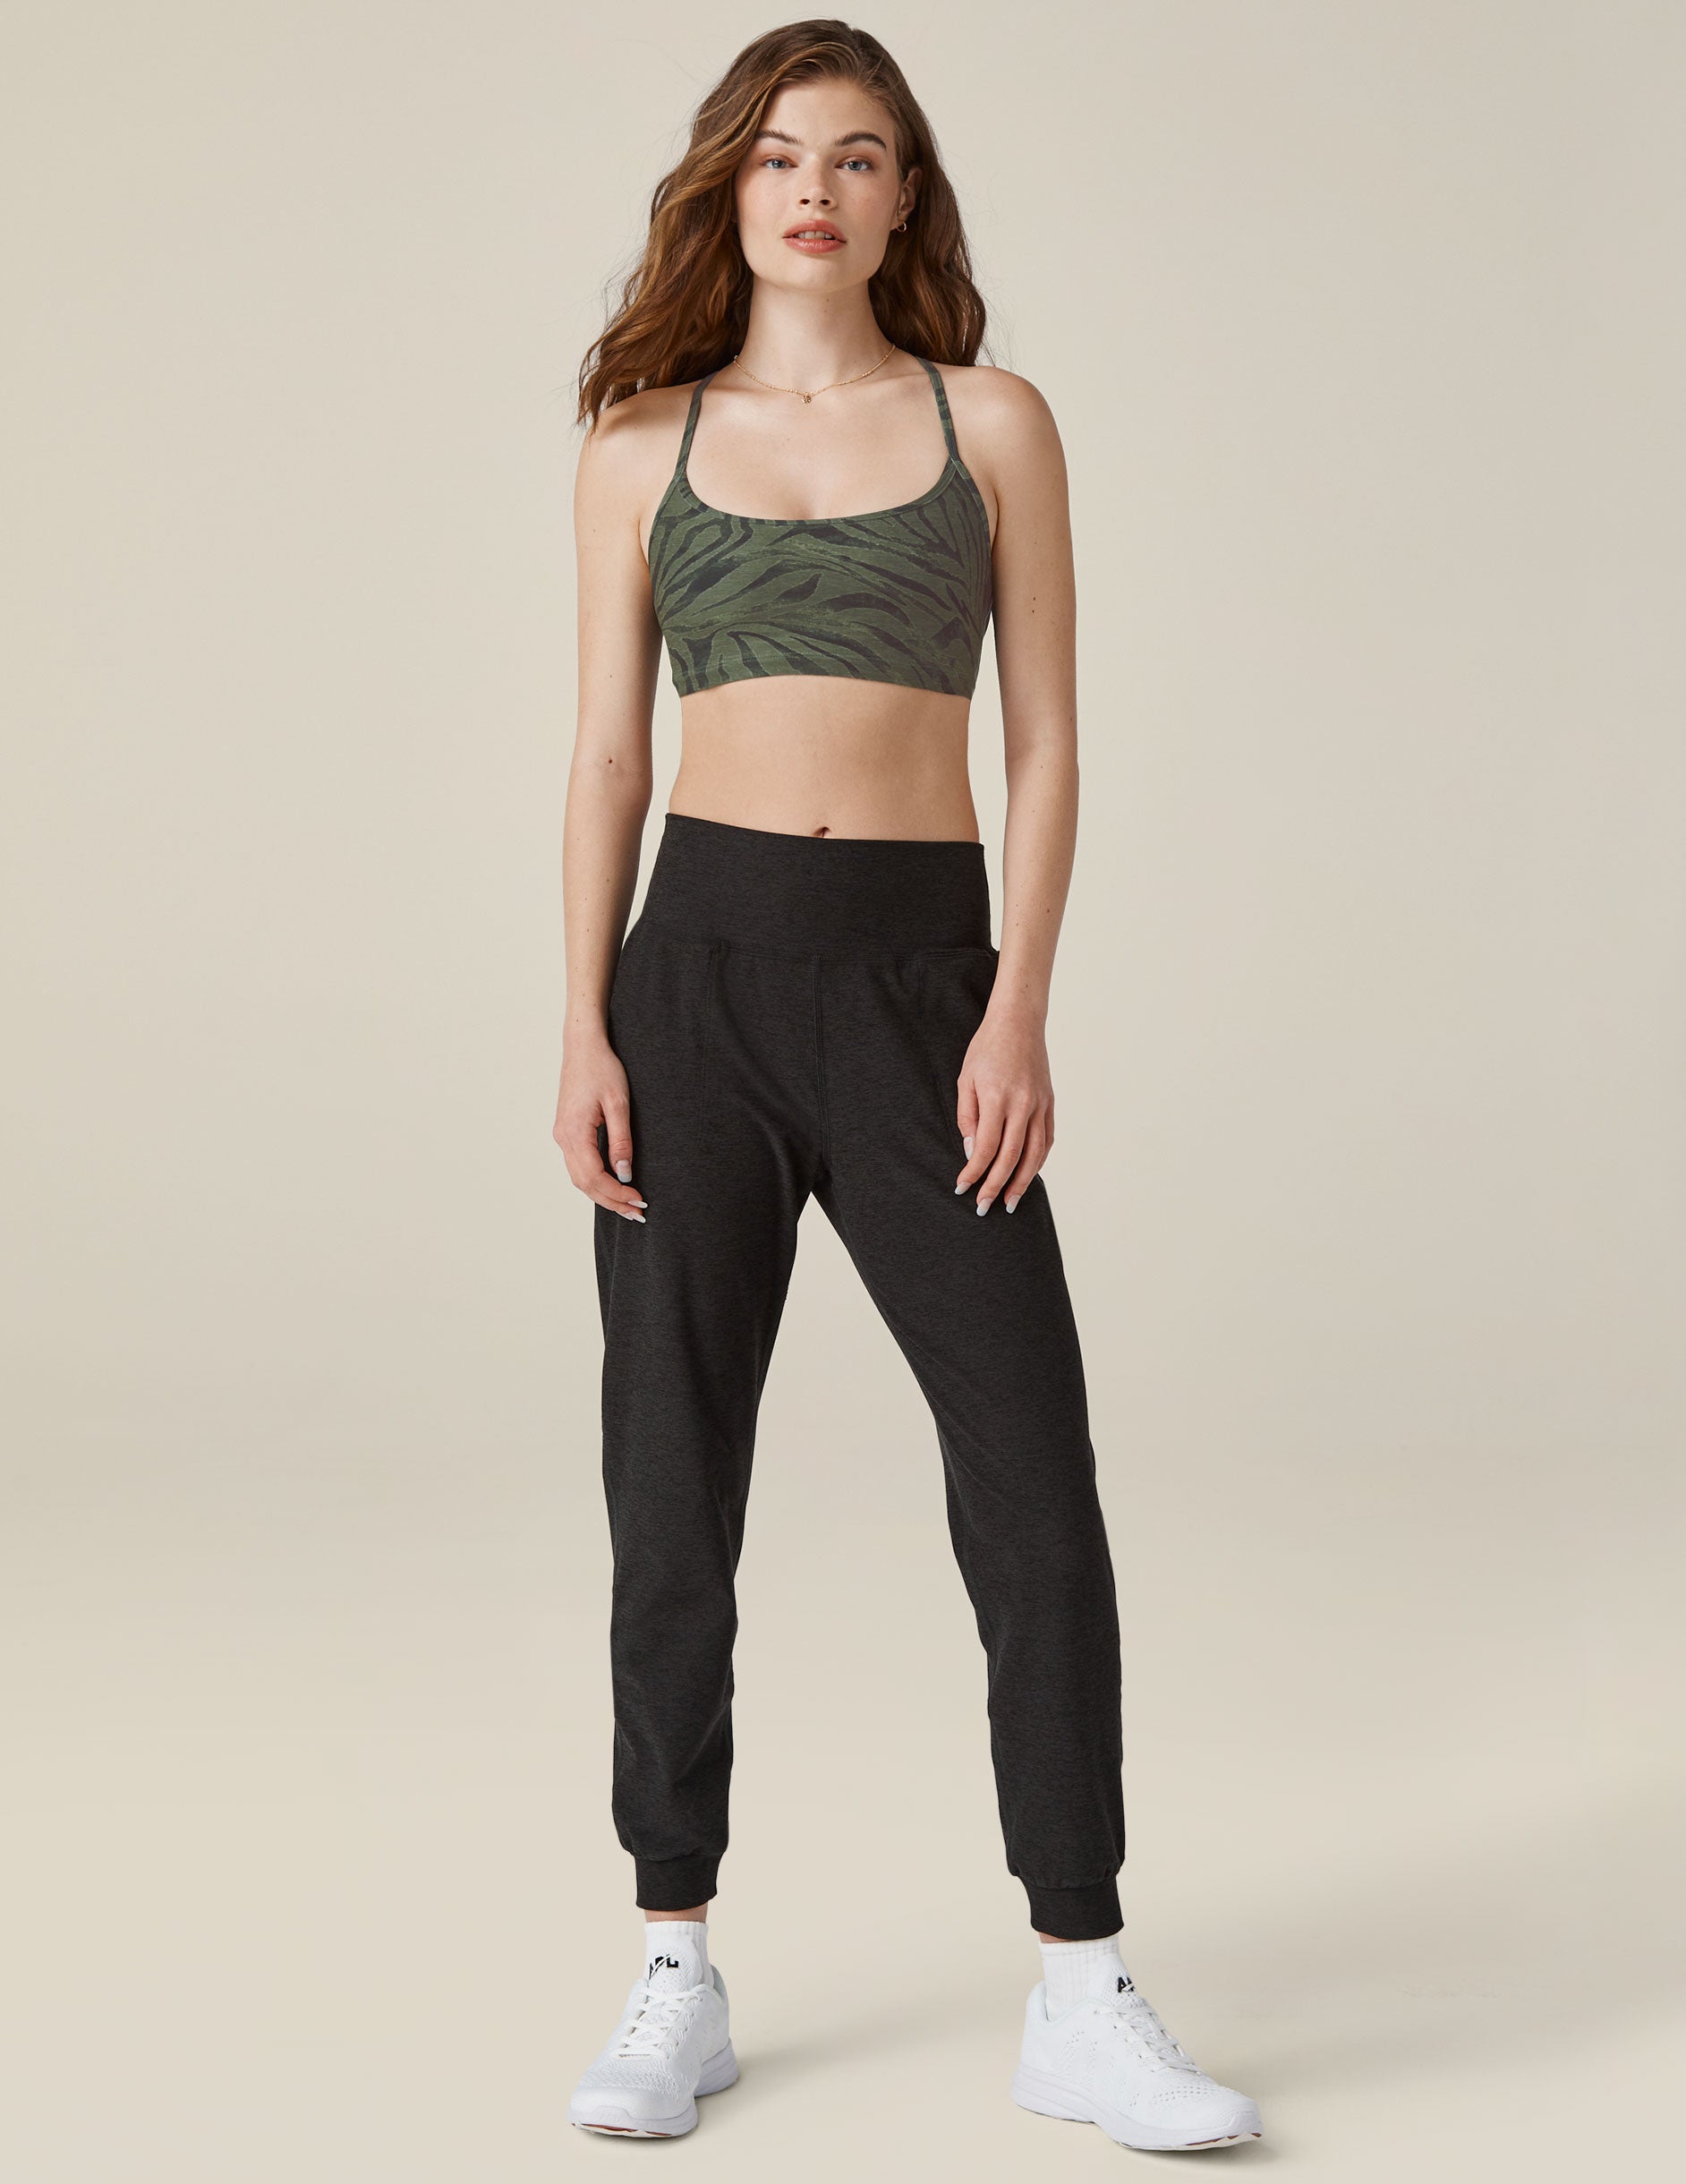  Beyond Yoga Lounge Around Jogger, Light Heather Gray, X-Small  : Clothing, Shoes & Jewelry